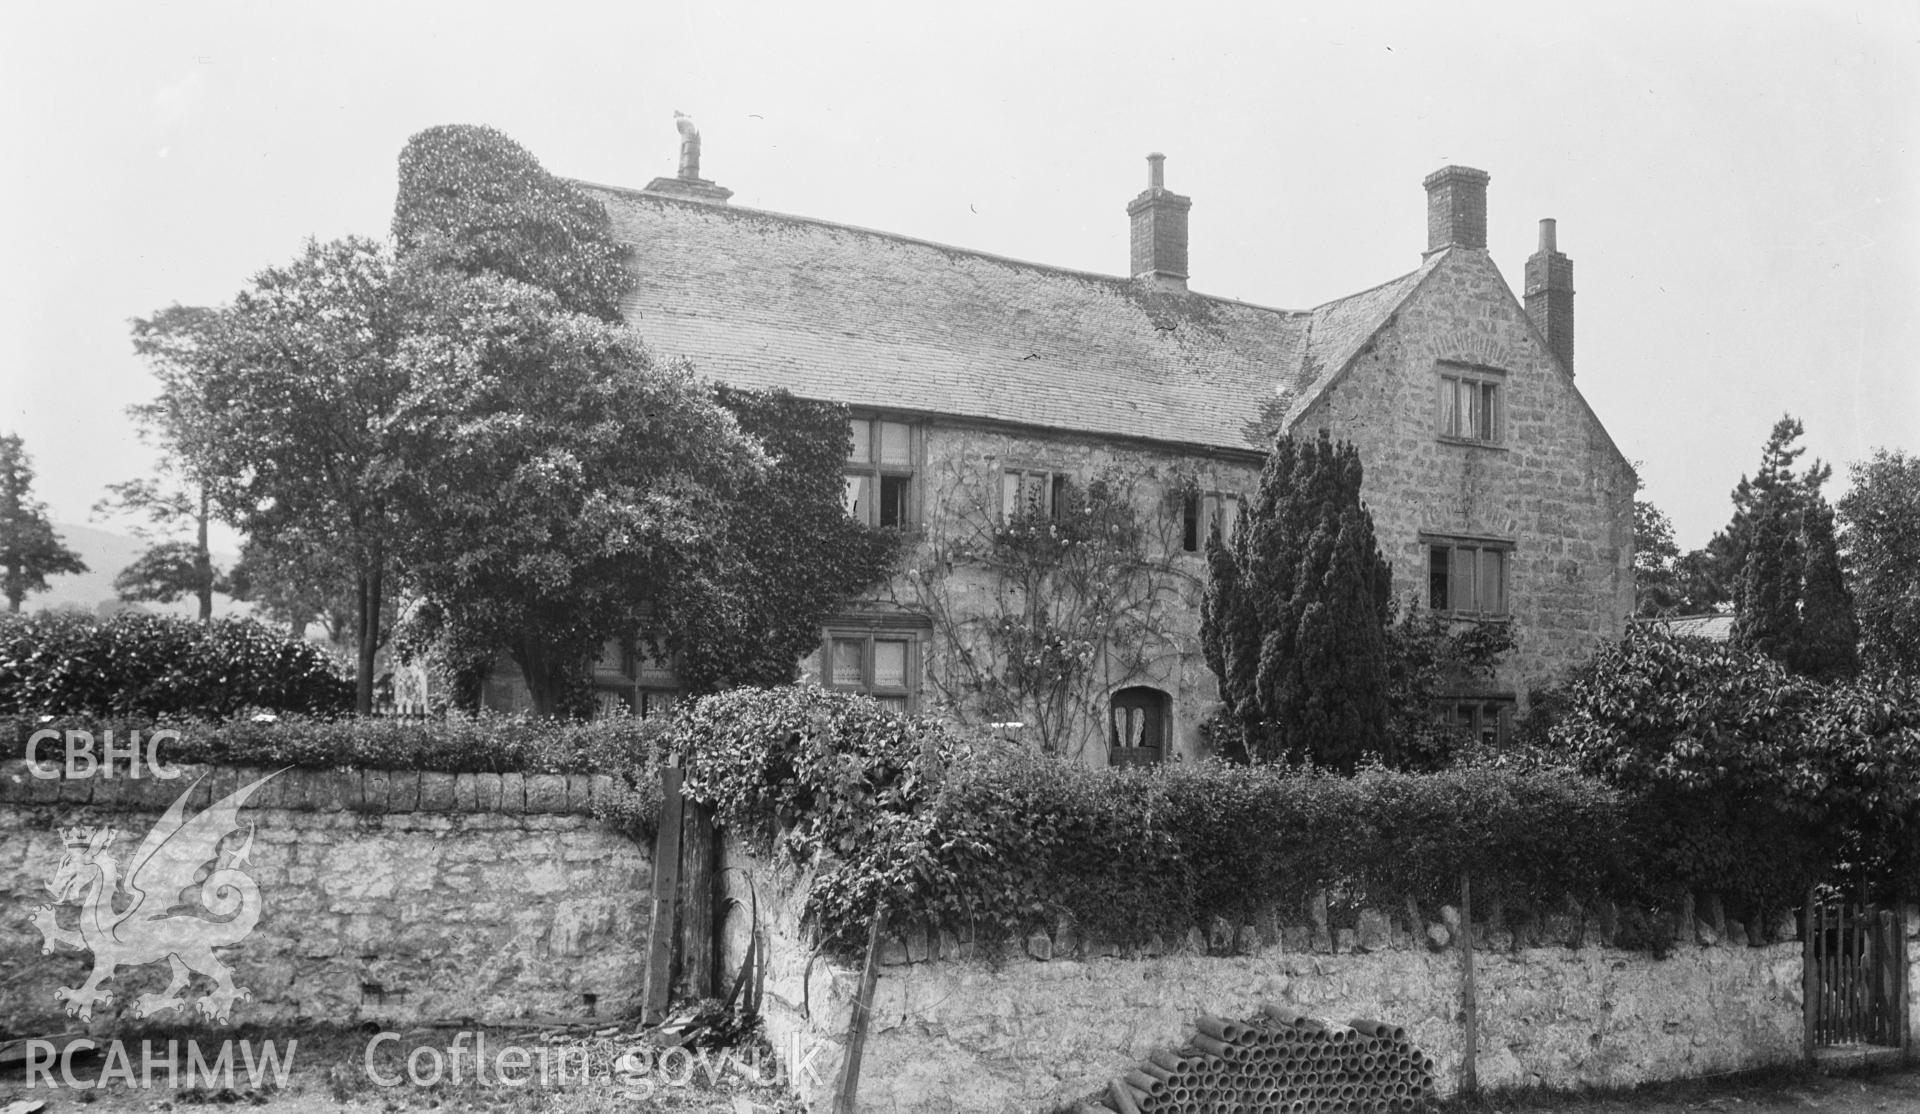 Digital copy of a nitrate negative showing view of Hendre Fawr from the south-east taken by Leonard Monroe, undated.